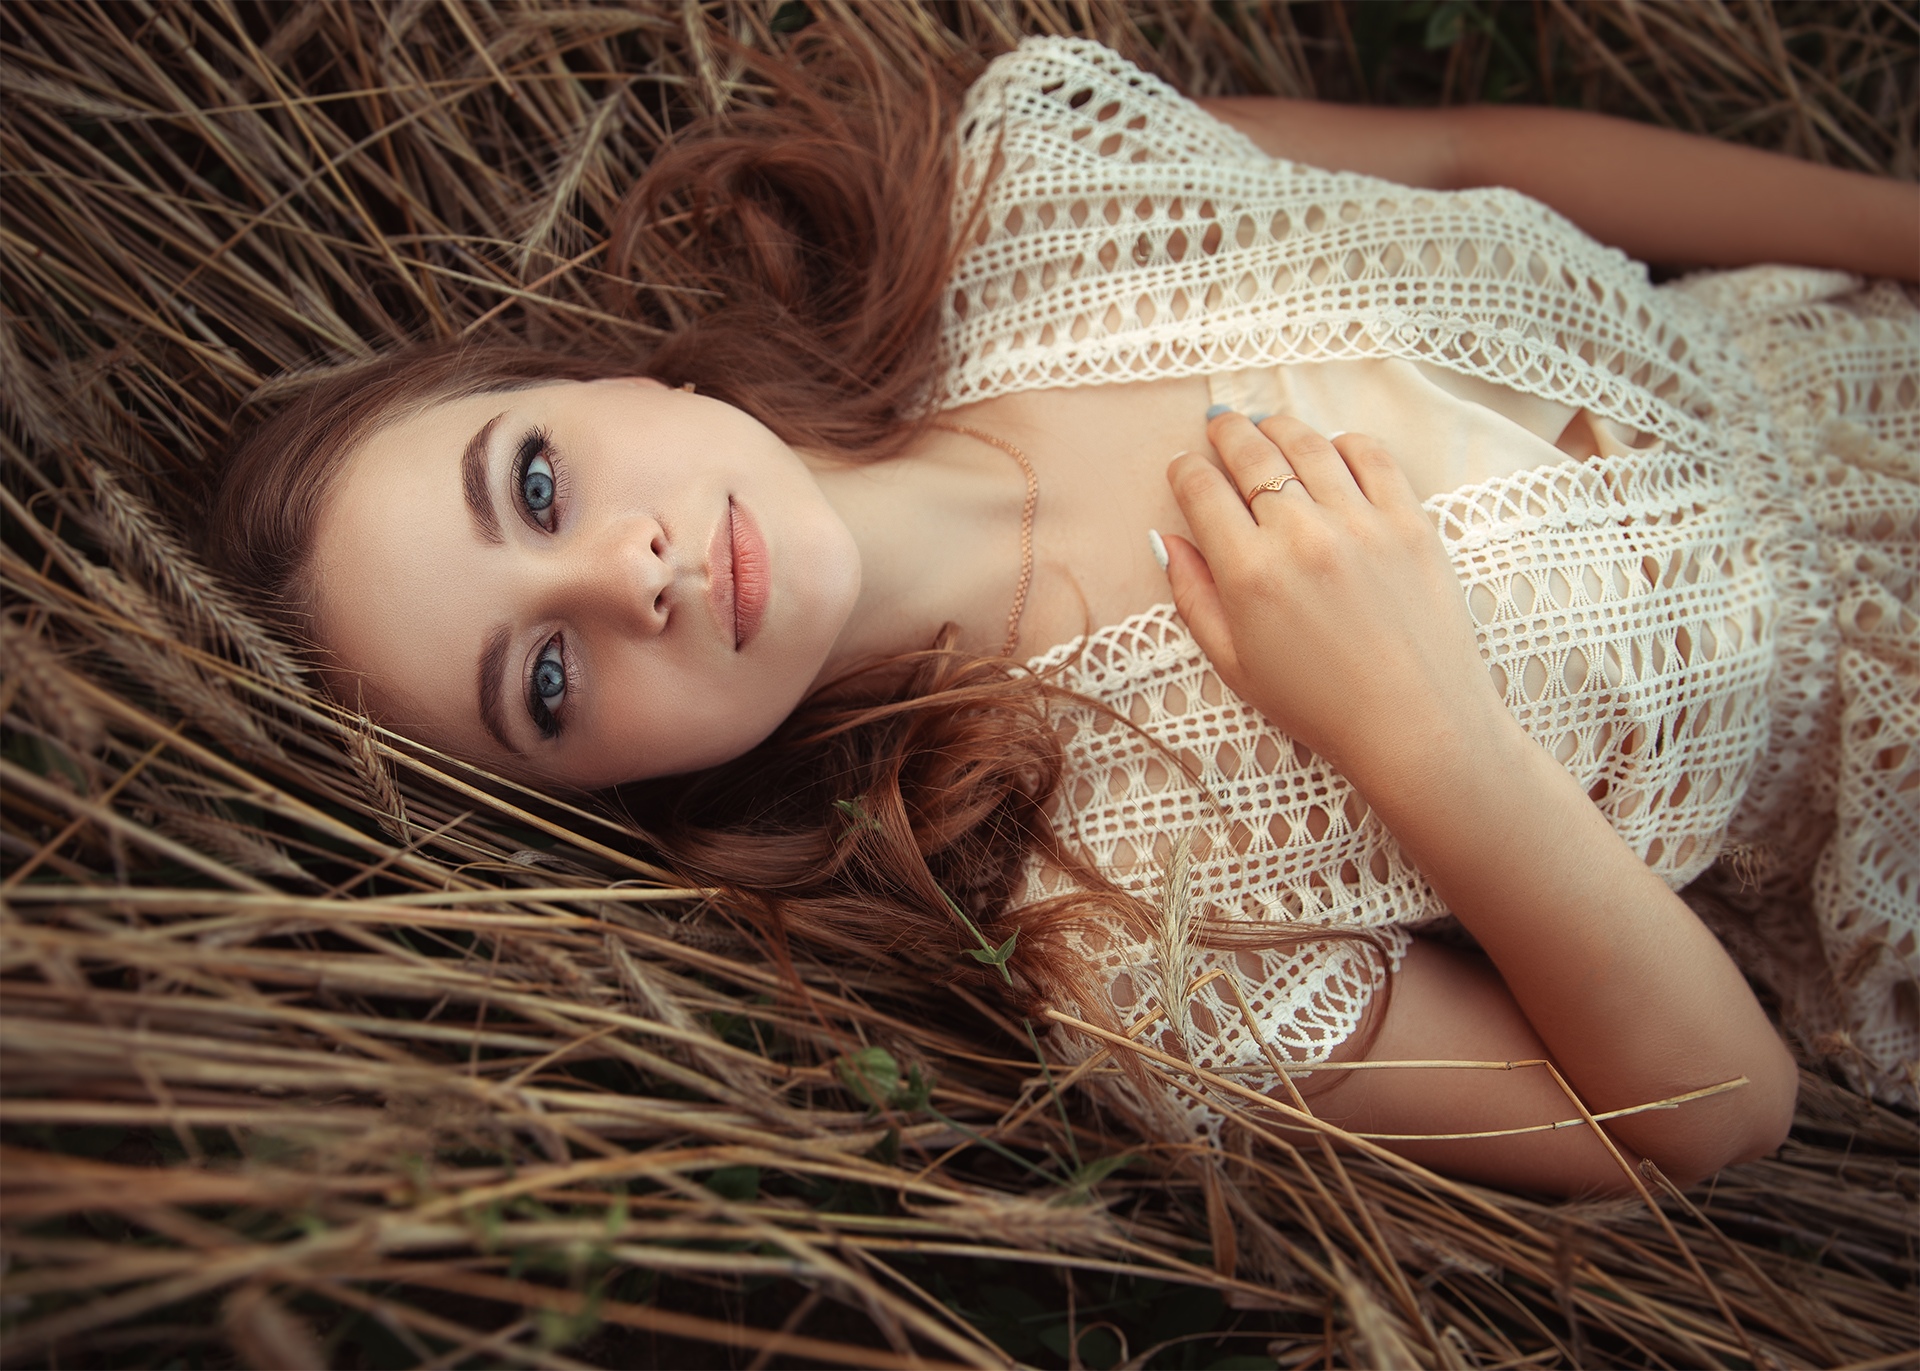 People 1920x1371 women model looking at viewer gray eyes painted nails lying on back dry grass portrait women outdoors closed mouth lying down grain Caucasian dress makeup brunette